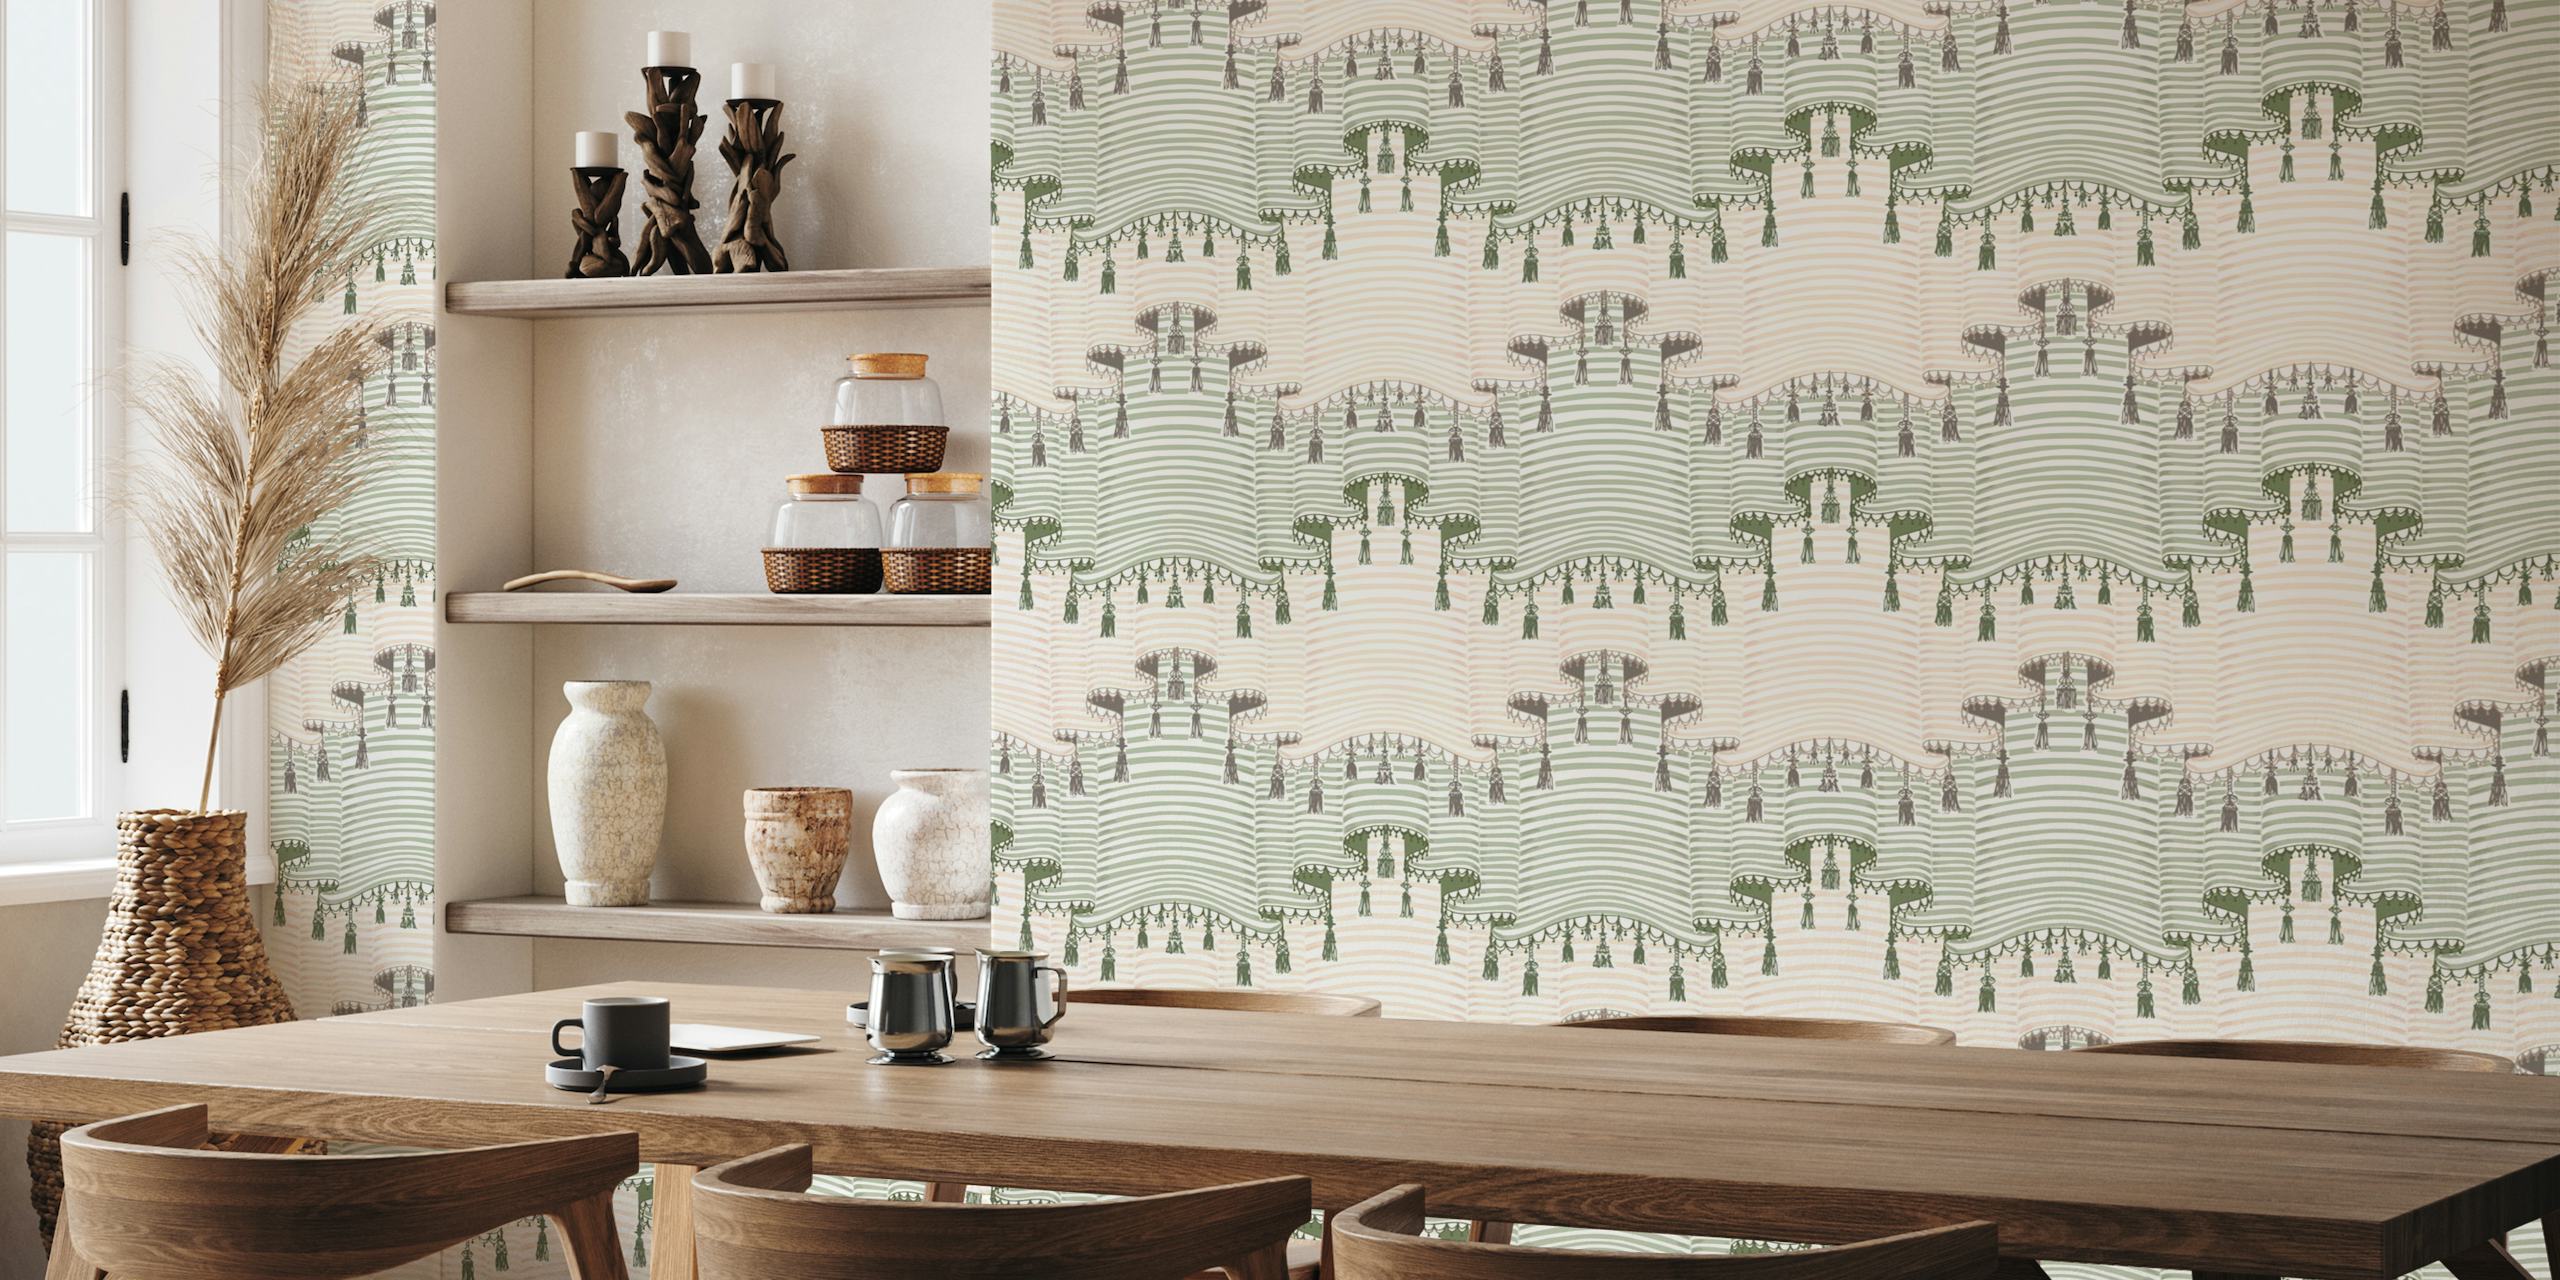 Luxurious Wall Sage Blush wall mural with abstract pattern in sage and blush colors